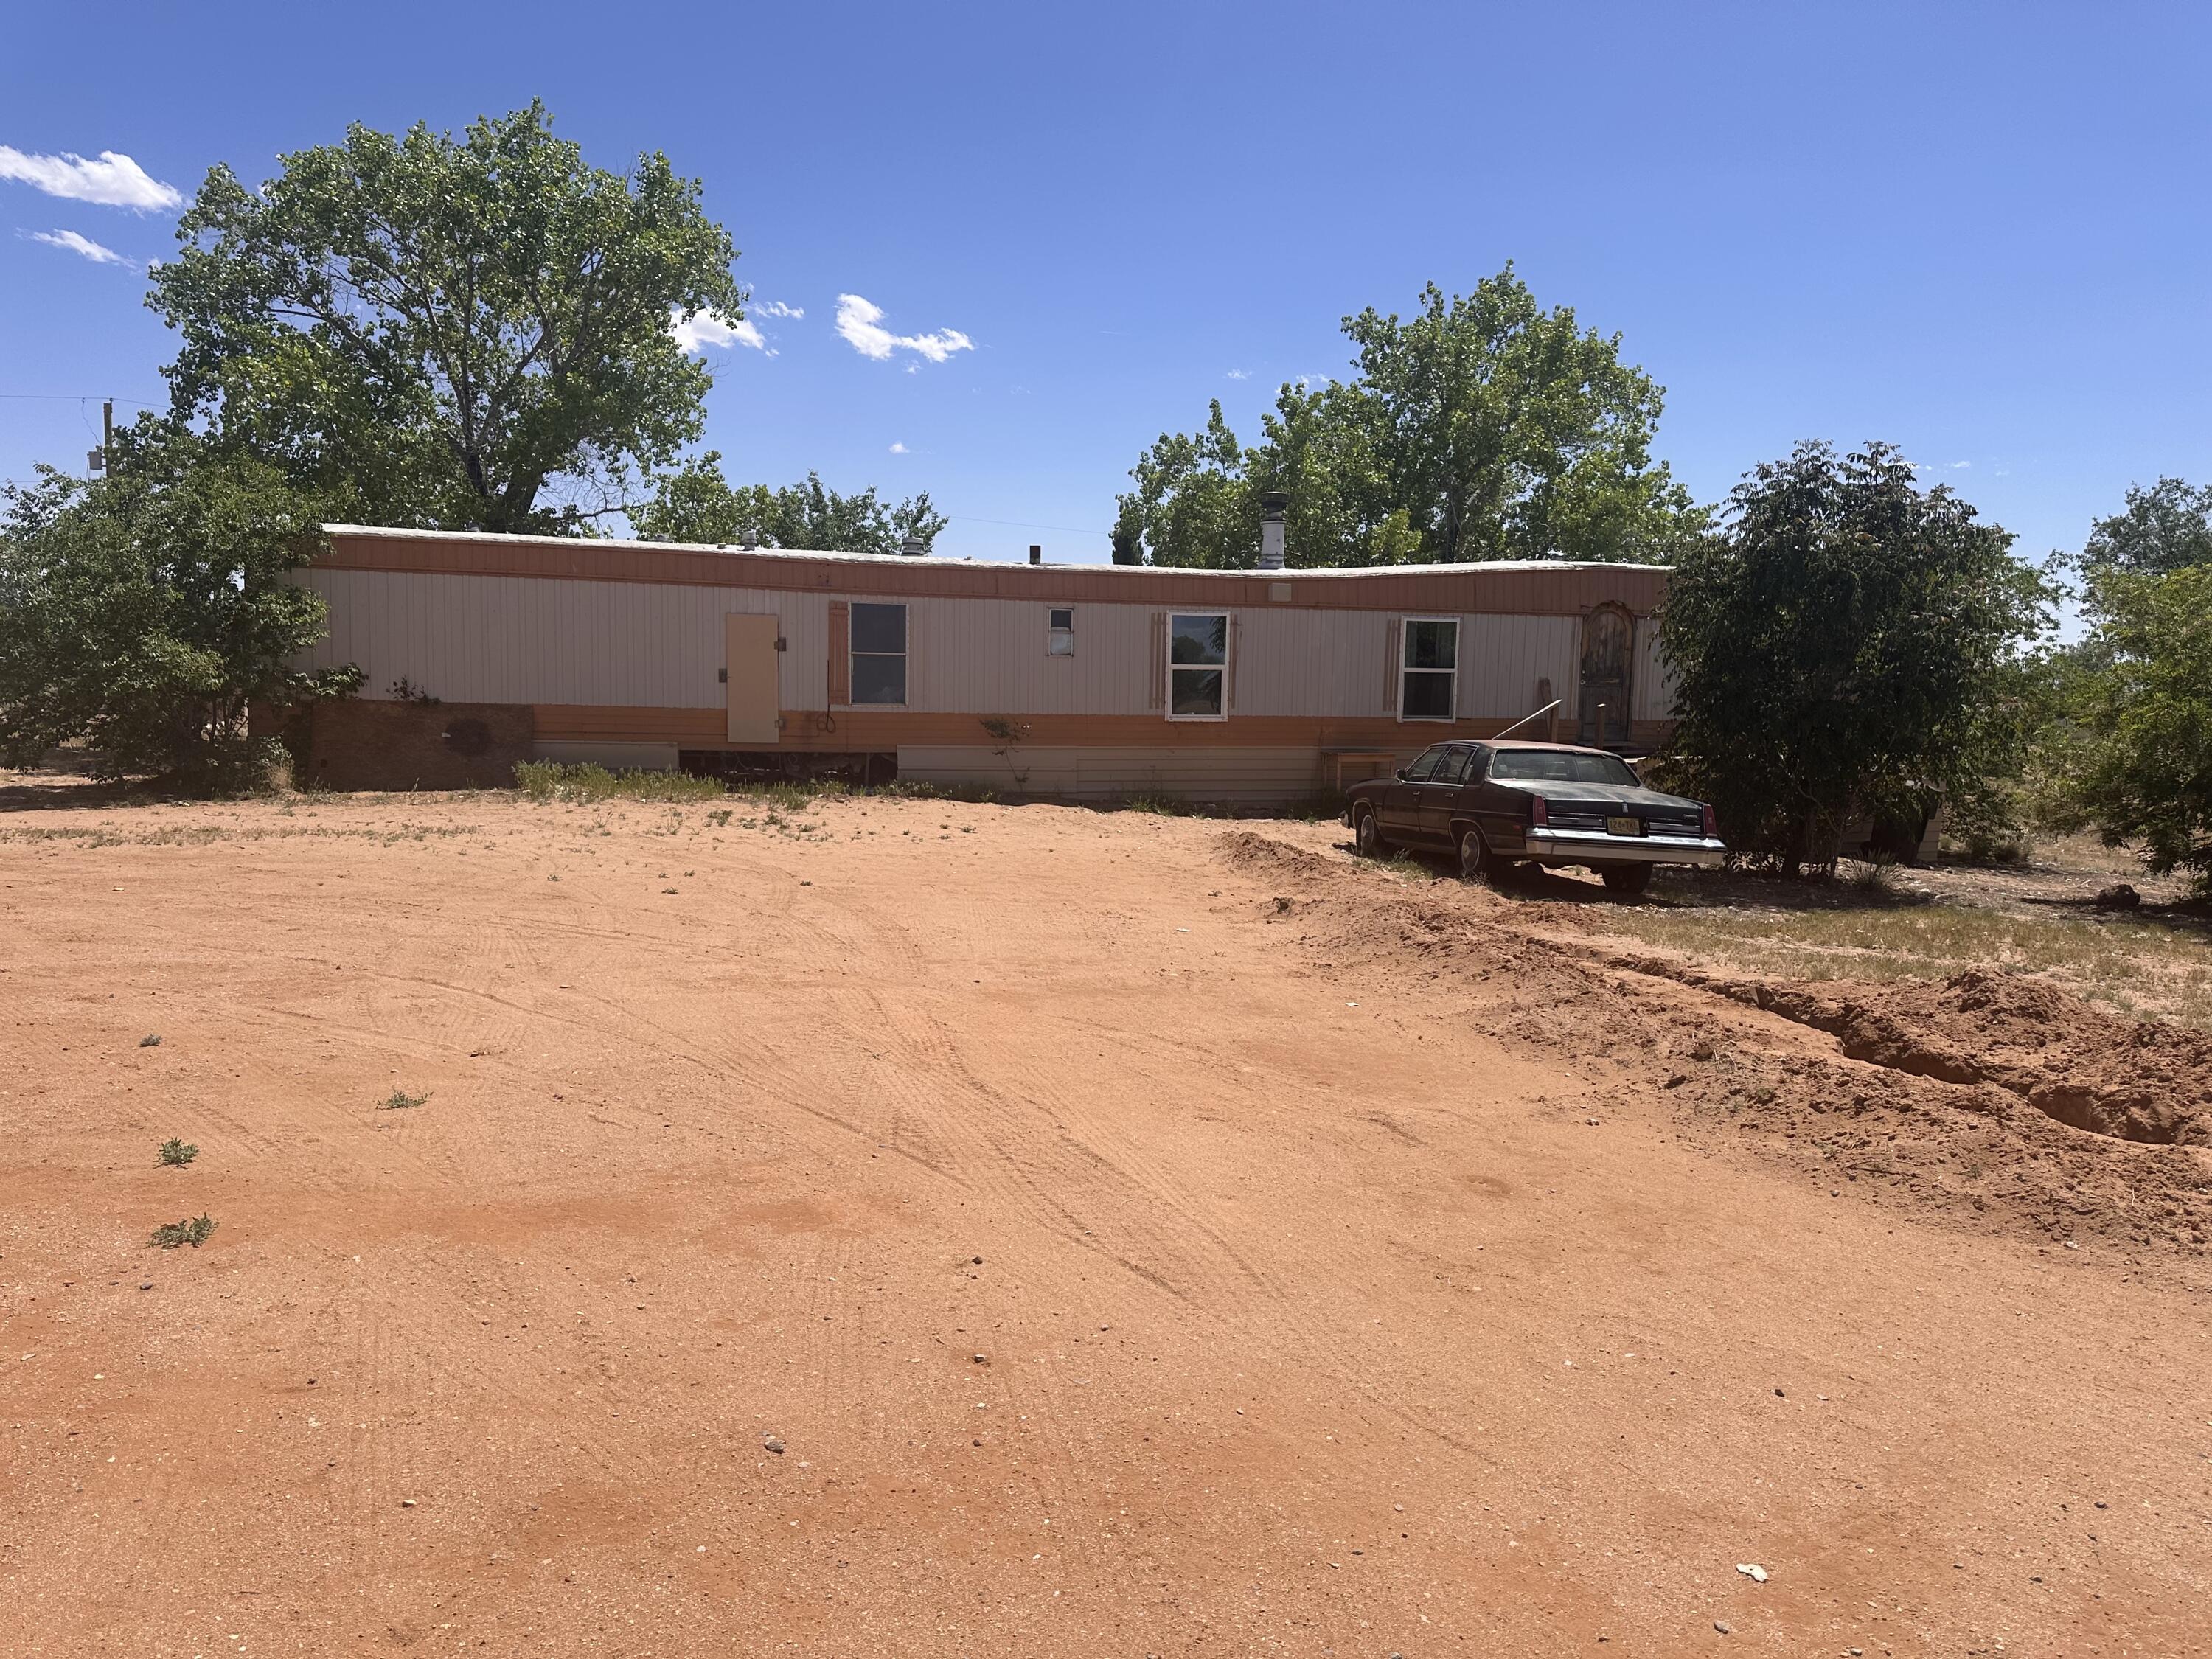 Great potential in this property. Investor special.  Property includes 1.35 acres with large workshop/Garage 40' x 34'.  Workshop is stick built on concrete pad with metal roof. Manufactured home needs work, but can be replaced or remodeled.